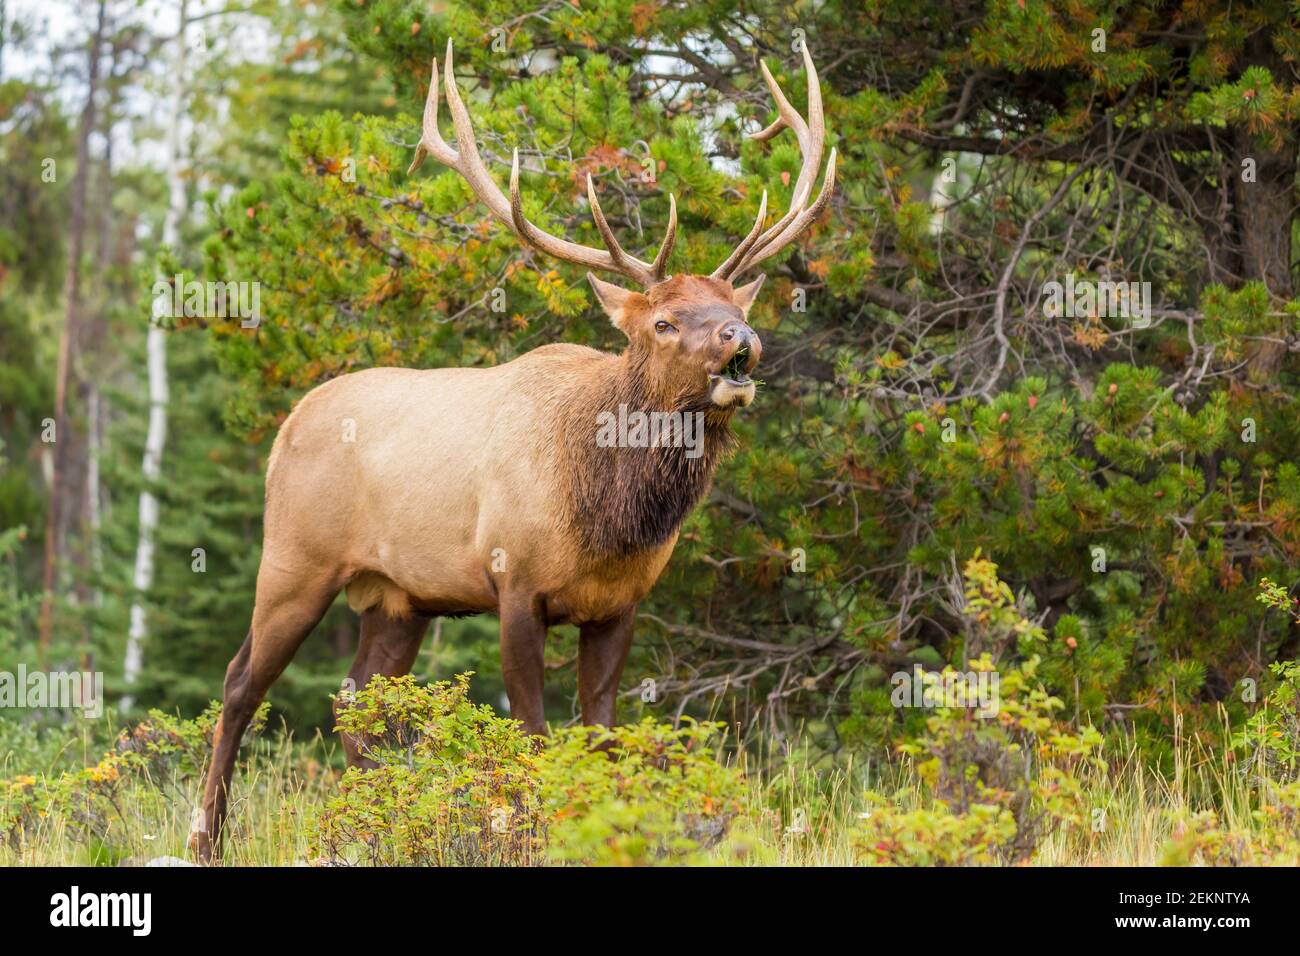 Bull Elk (Cervus canadensis) (Wapiti) with big antlers, calling a cow elk during the rut season in fall in the Canadian Rockies Stock Photo